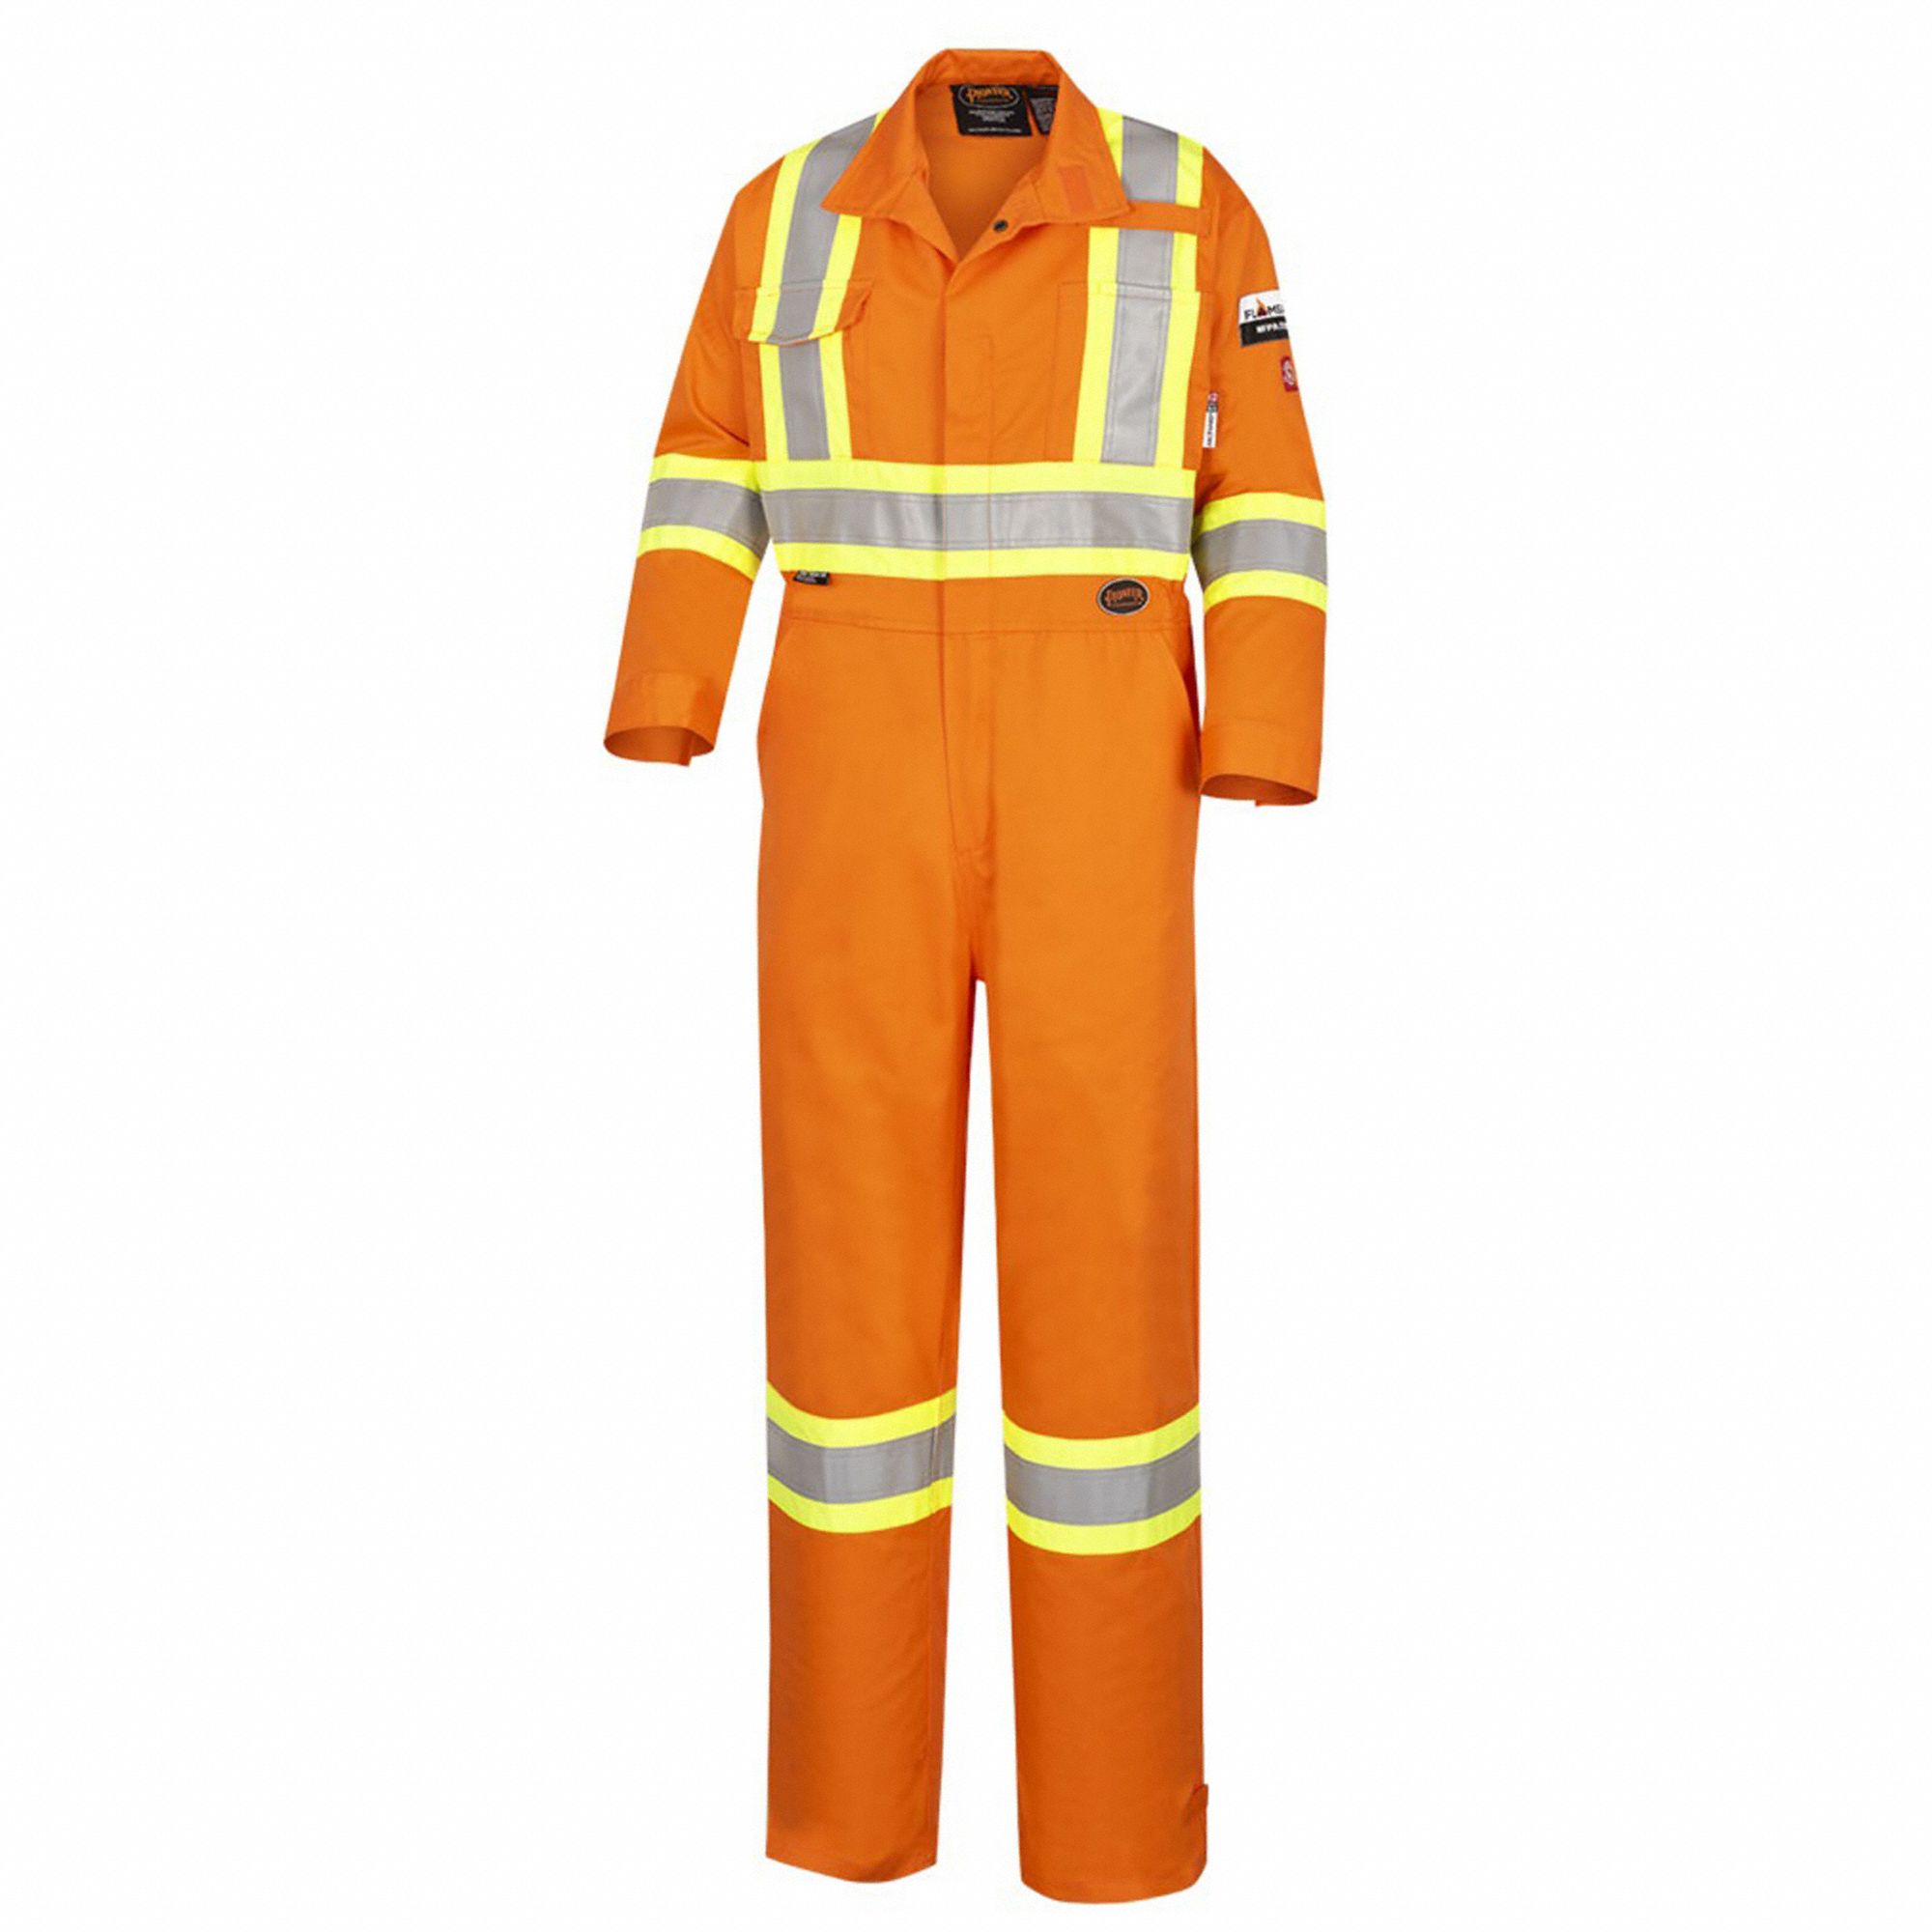 FLAME-RESISTANT COVERALLS, 48, ORANGE, 10 OZ FABRIC WEIGHT, 9 POCKETS